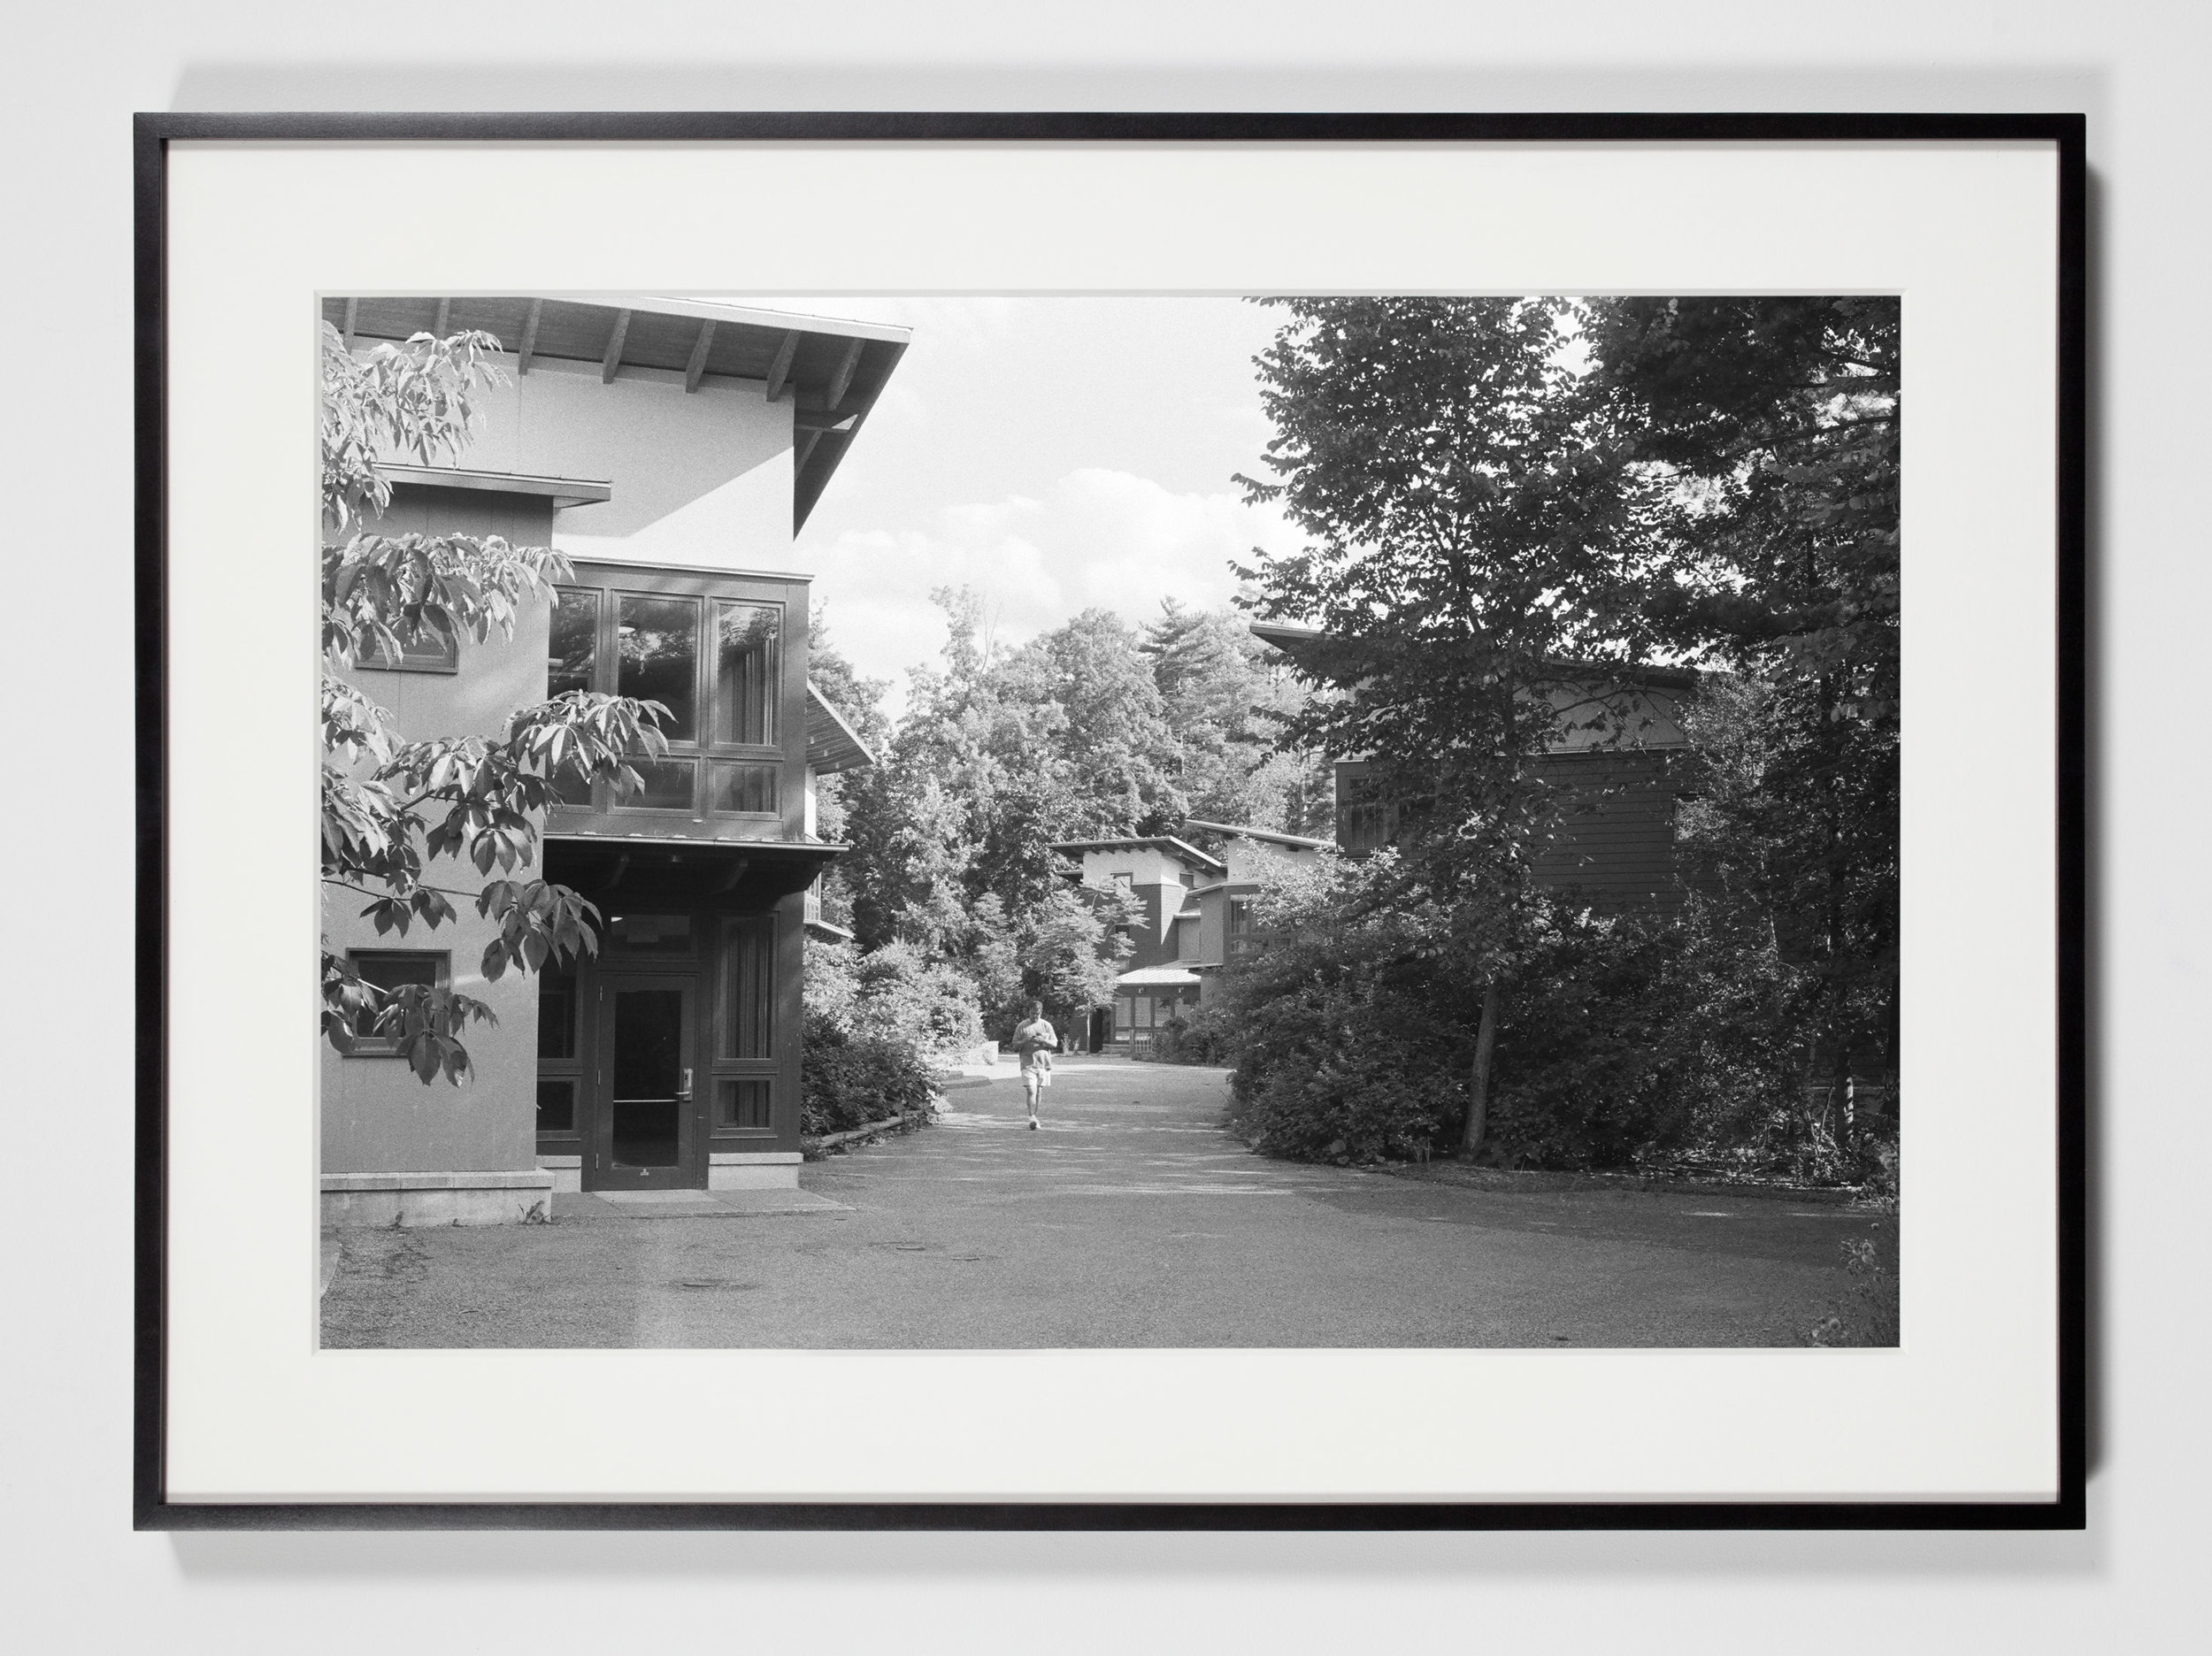   College Dormitories, Annandale-on-Hudson, New York, July 11, 2009    2011   Epson Ultrachrome K3 archival ink jet print on Hahnemühle Photo Rag paper  36 3/8 x 26 3/8 inches   Industrial Portraits, 2008–     